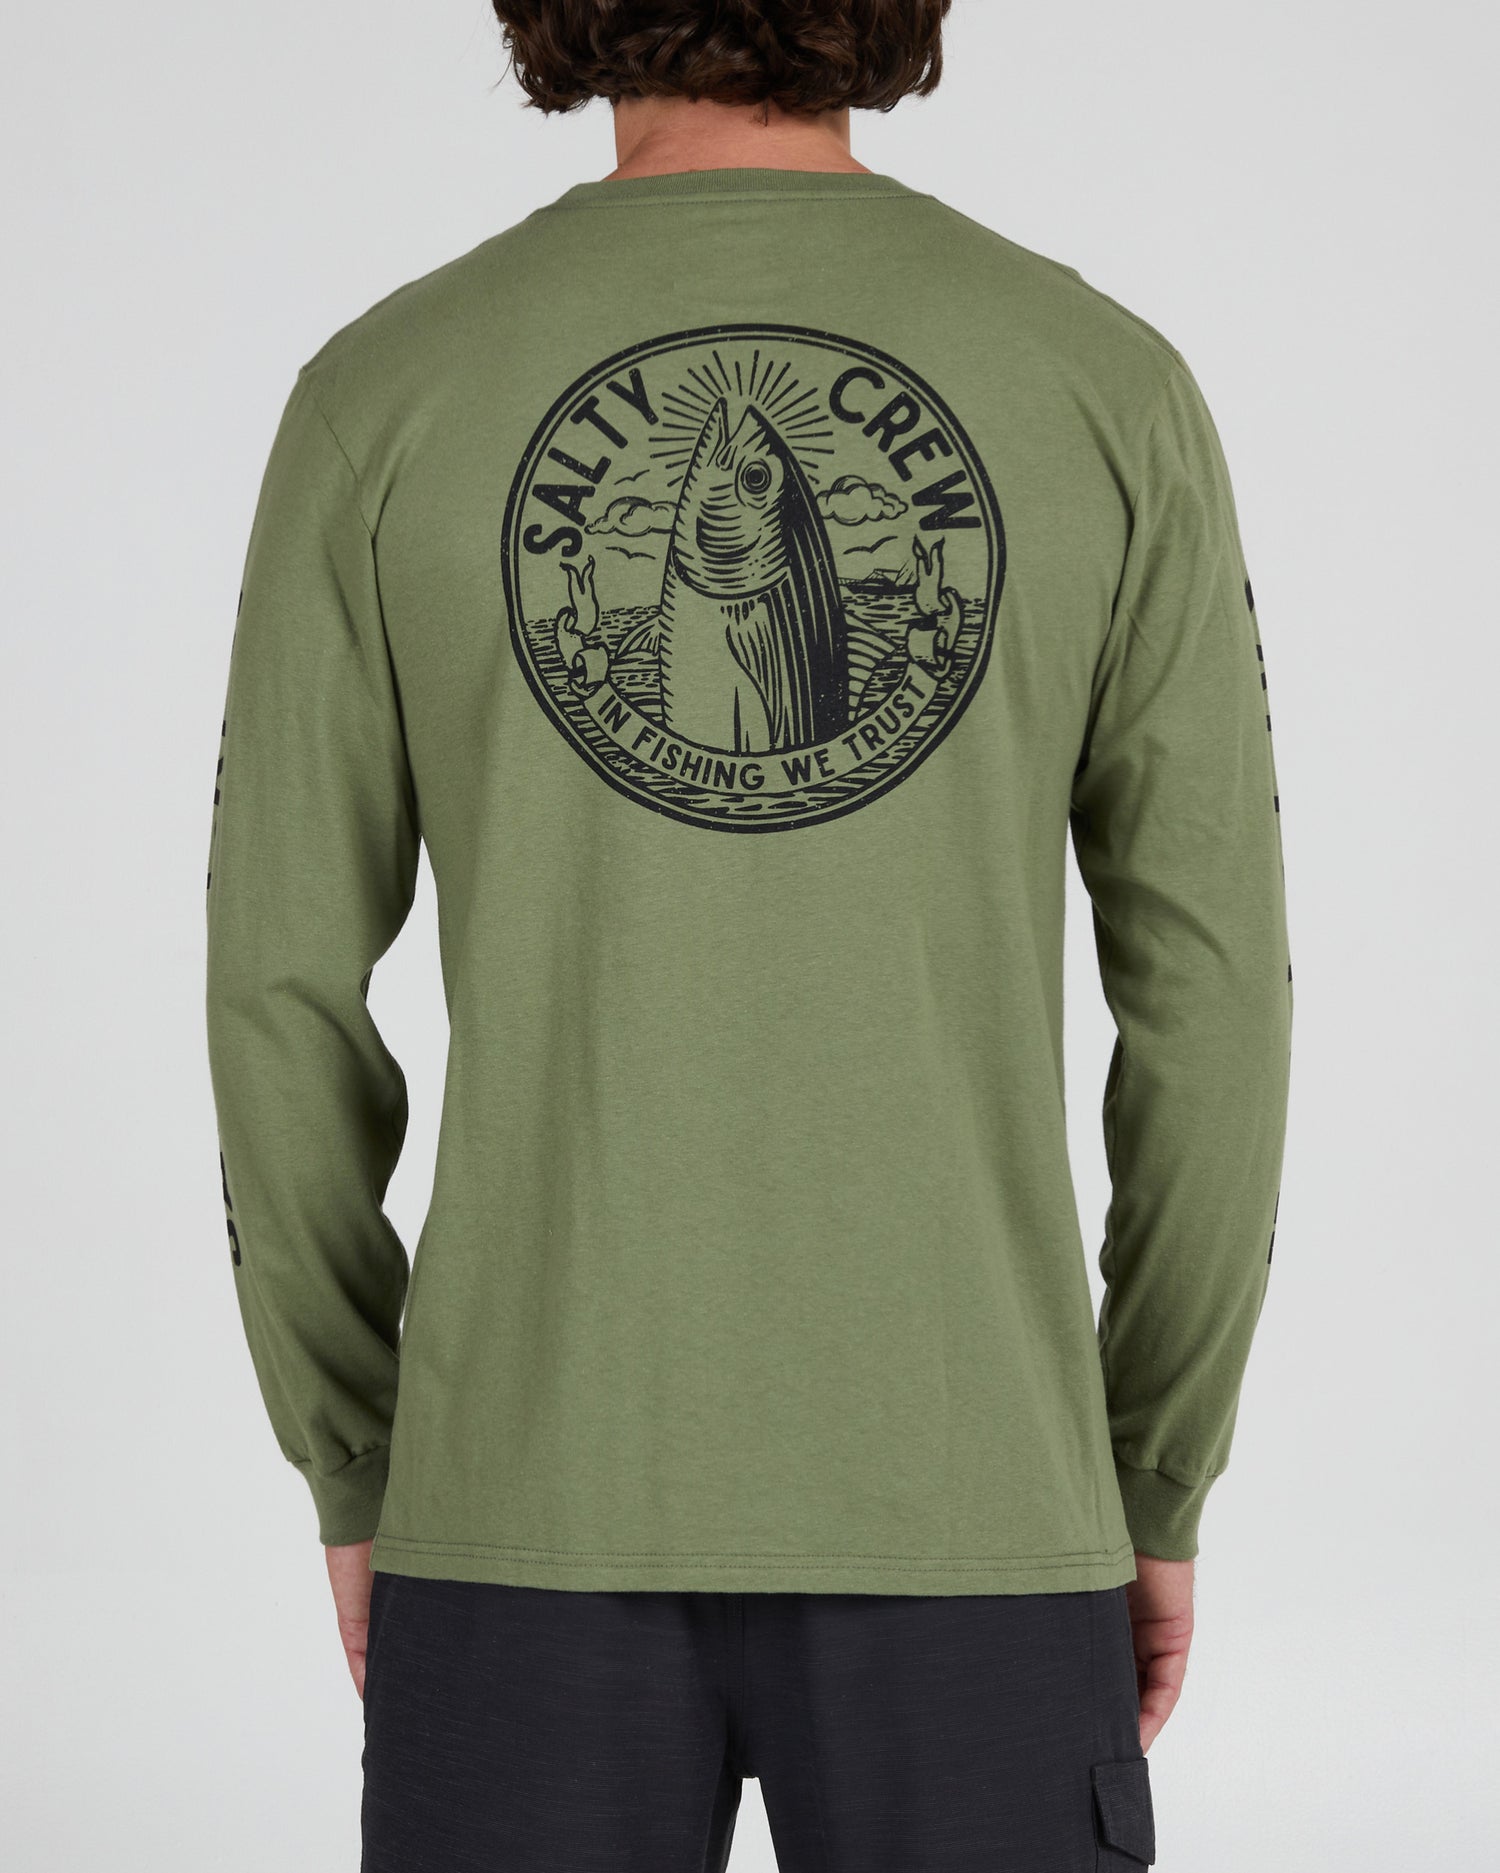 On body back of the In Fishing We Trust Sage Green L/S Premium Tee